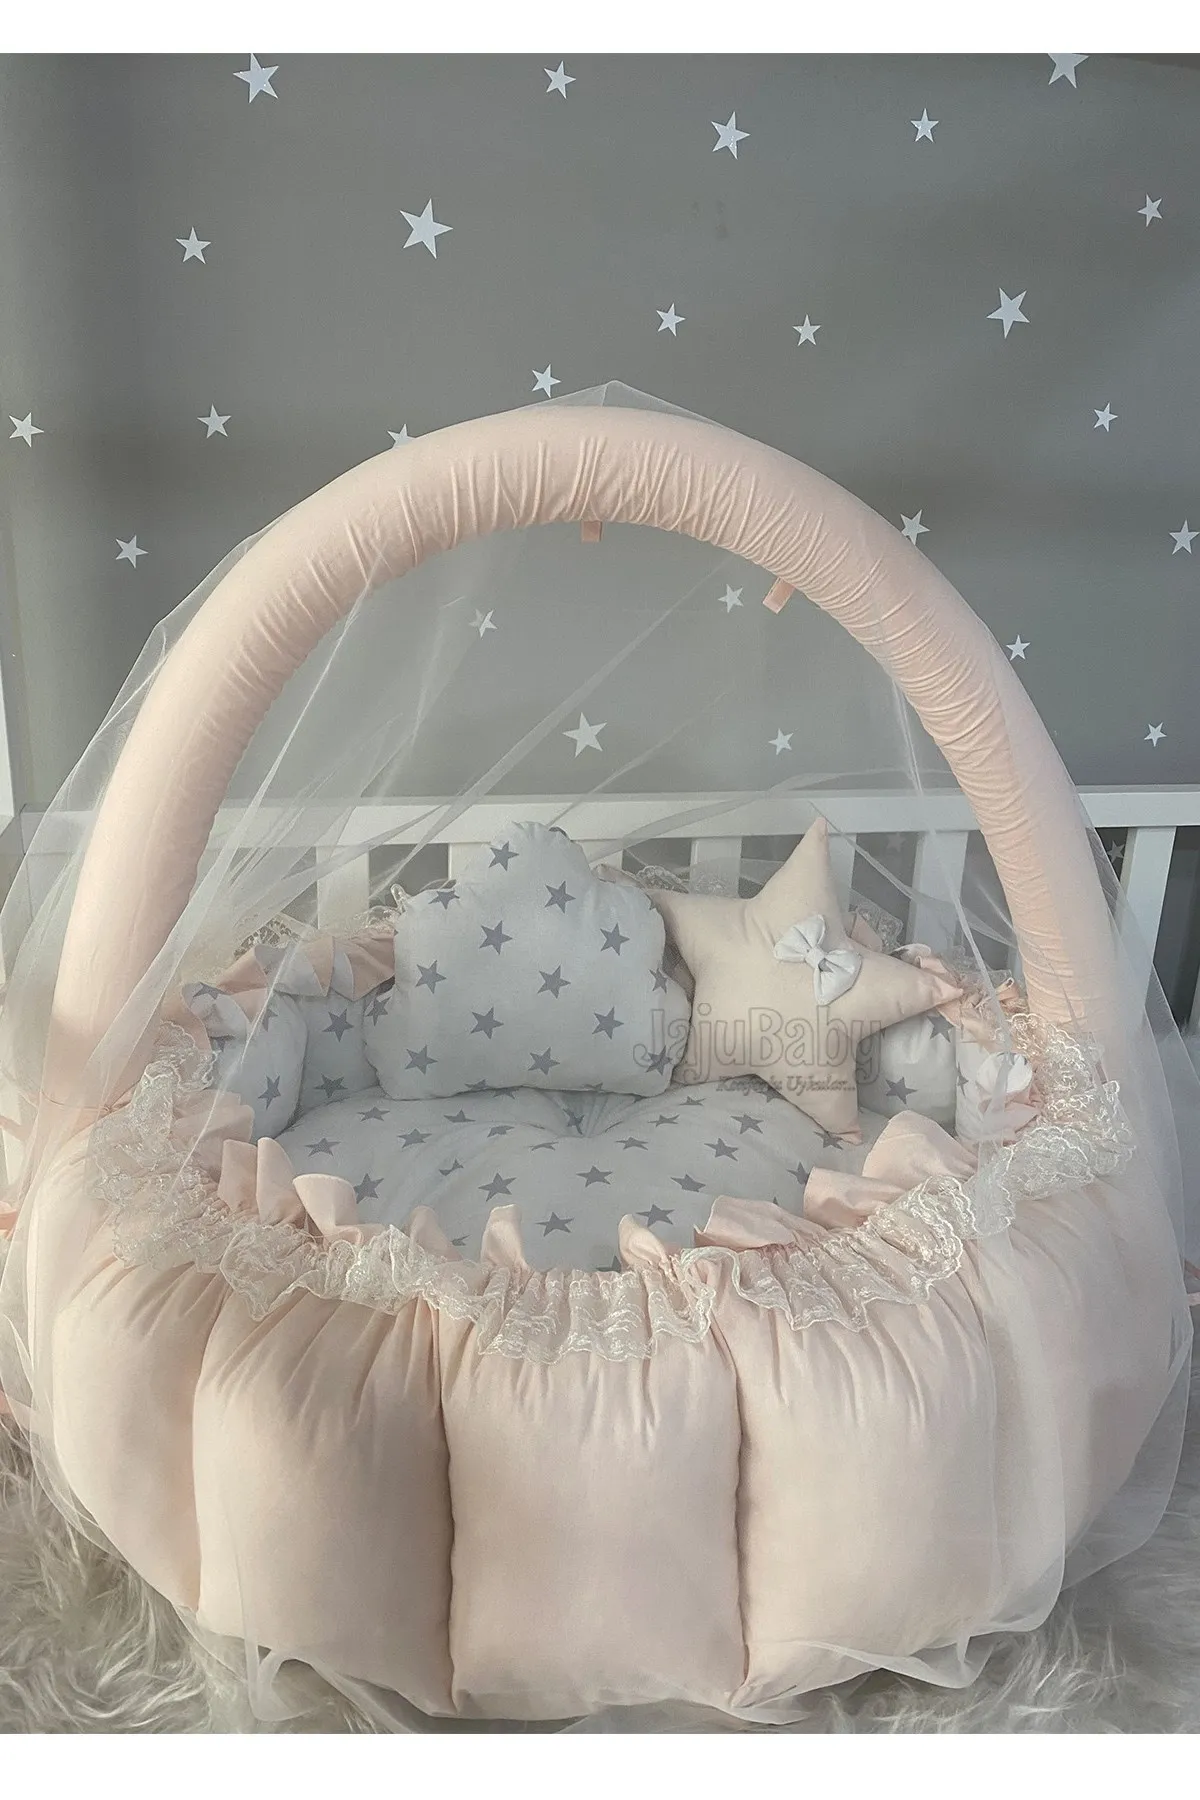 Jaju Baby Handmade Salmon Color Open-Close Play Mat Babynest with Mosquito Net Apparatus